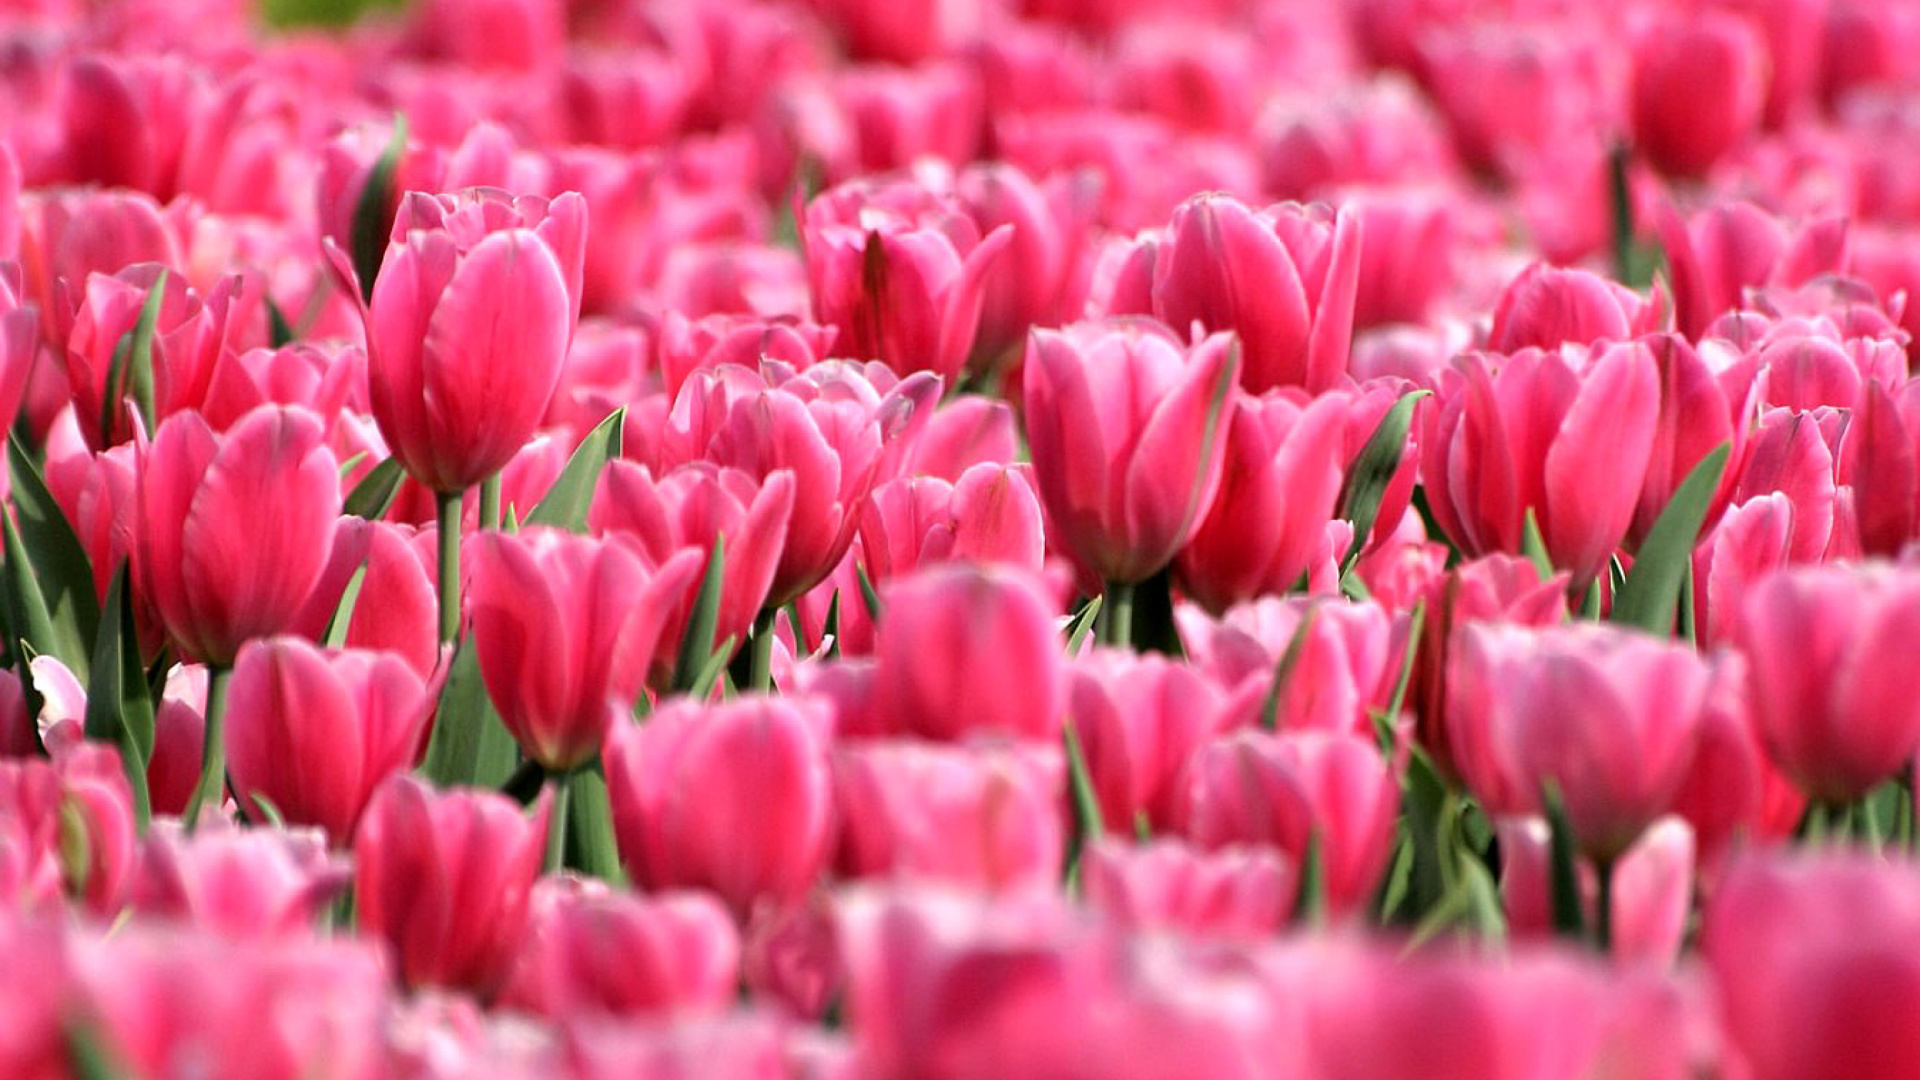 Pink Tulips in Holland Festival screenshot #1 1920x1080